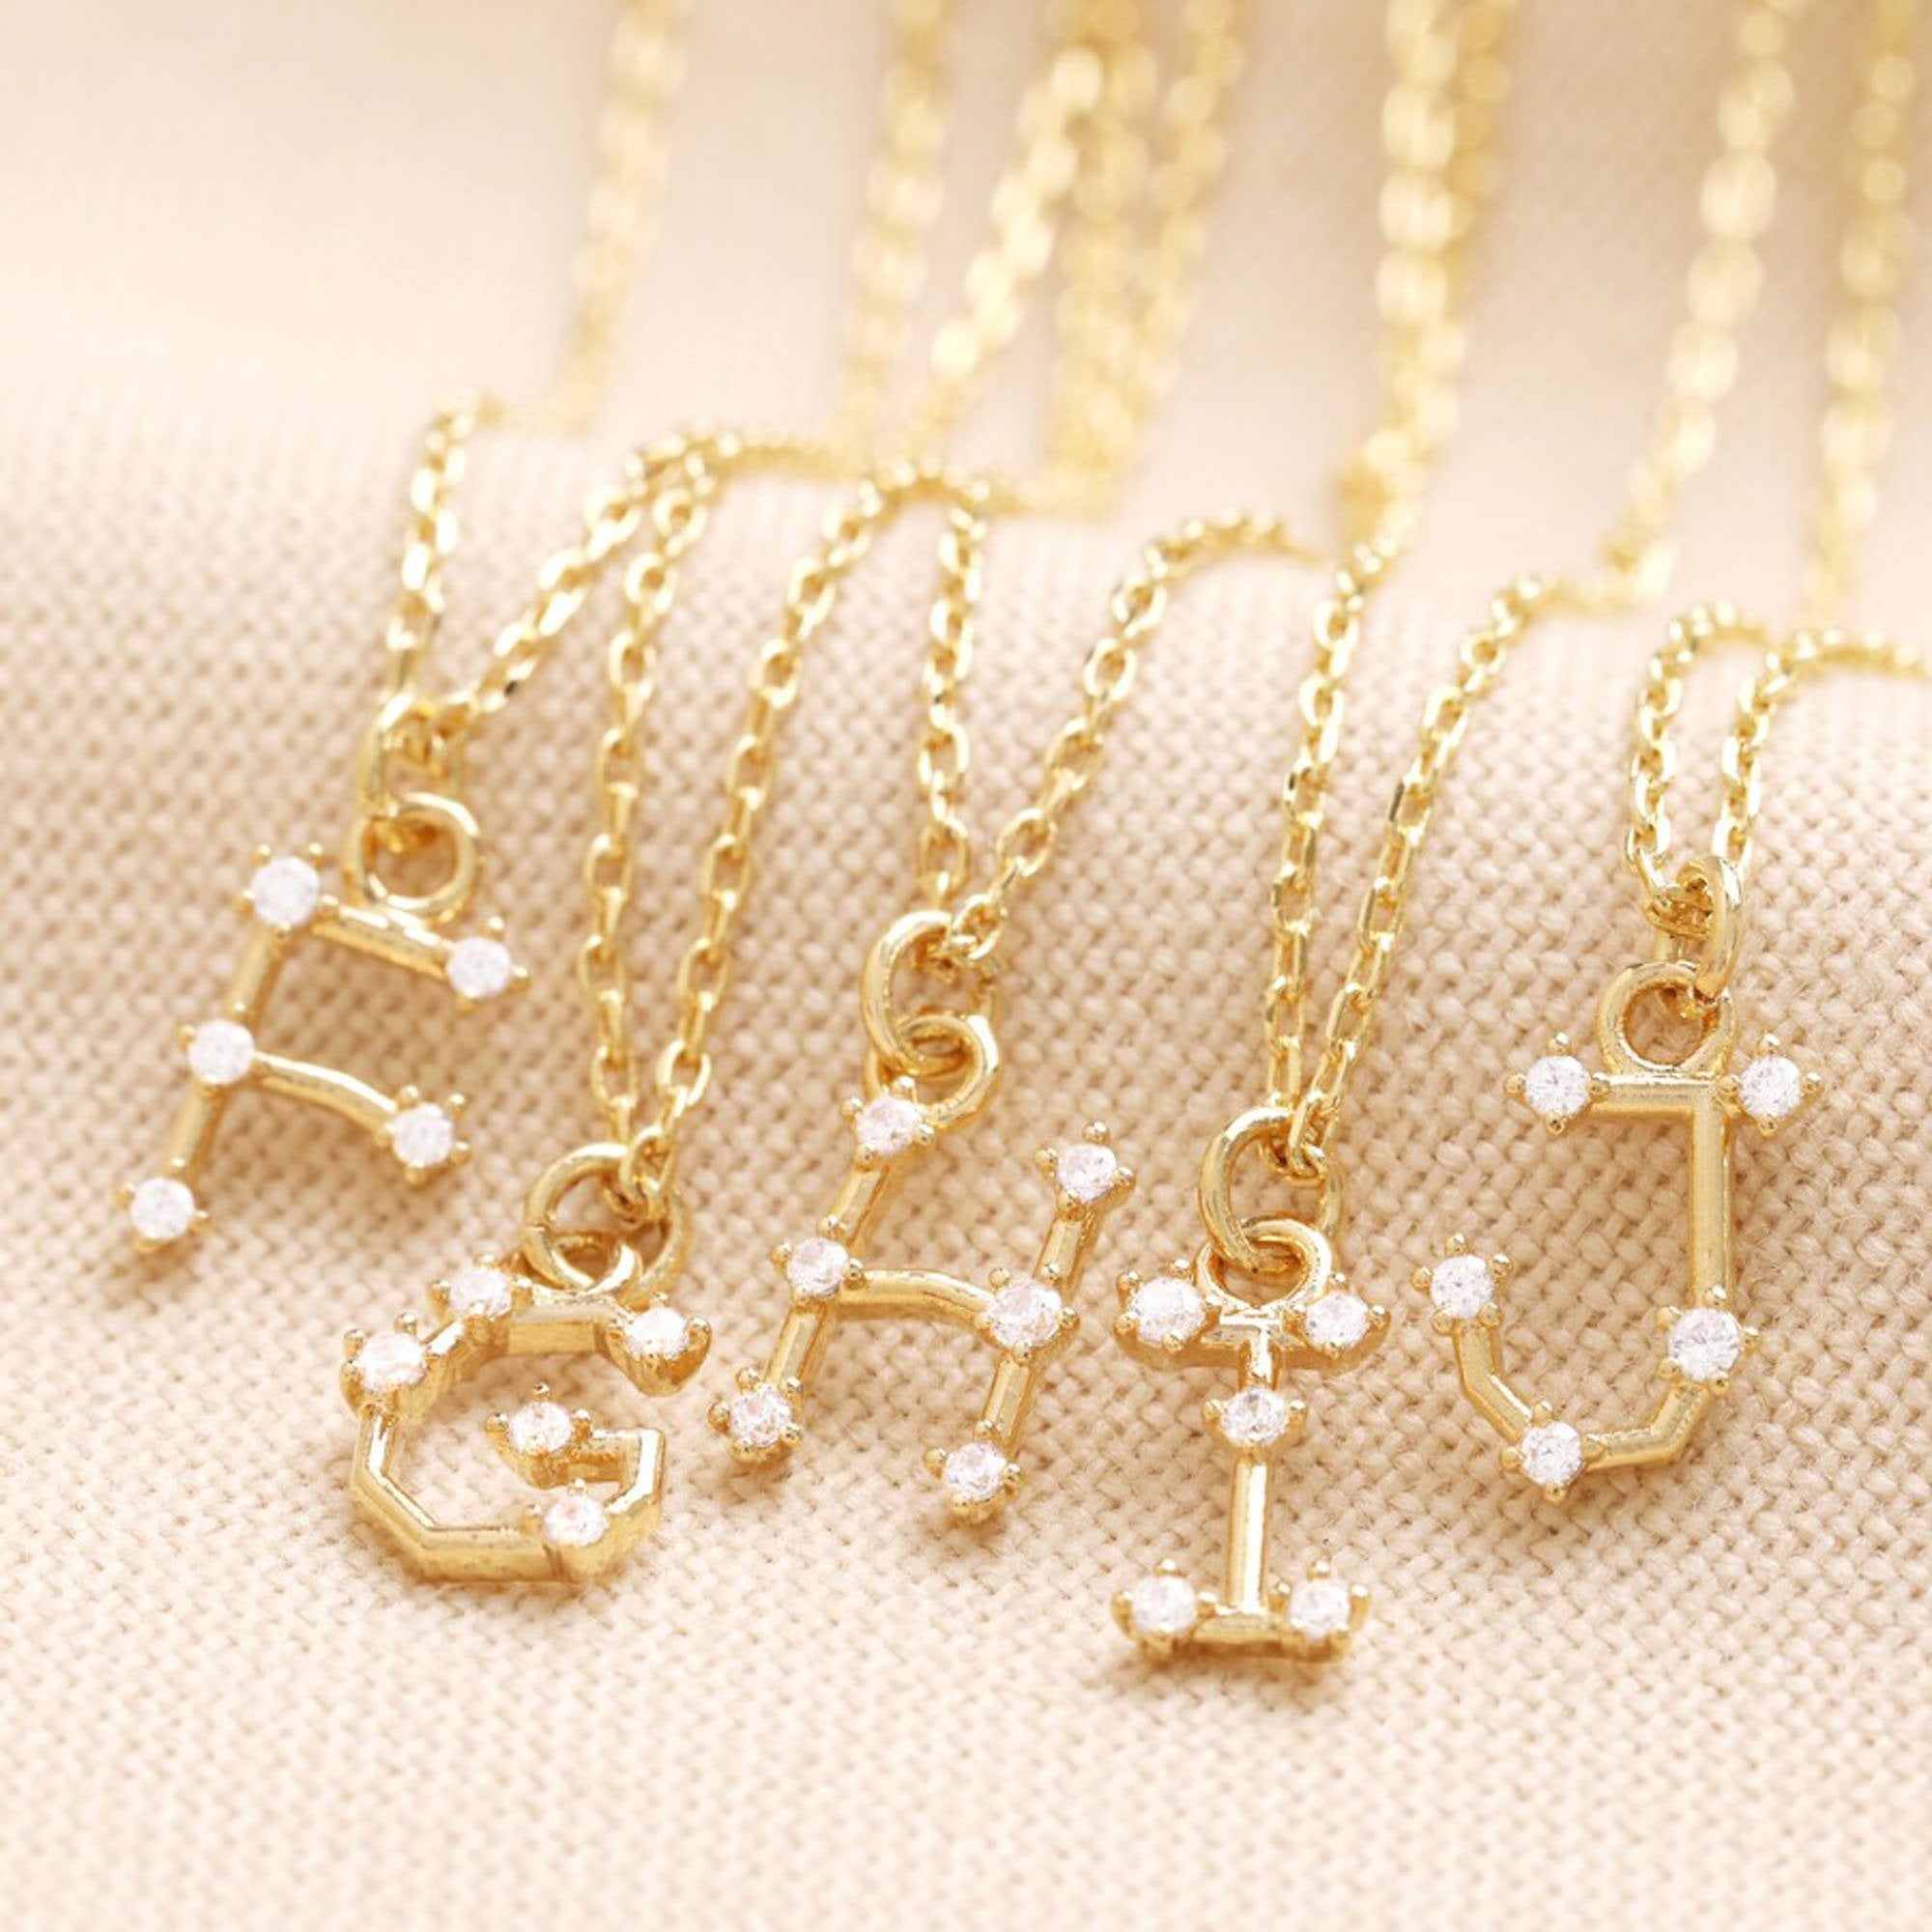 Horoscope Constellation Gold Necklace – Pineal Vision Jewelry